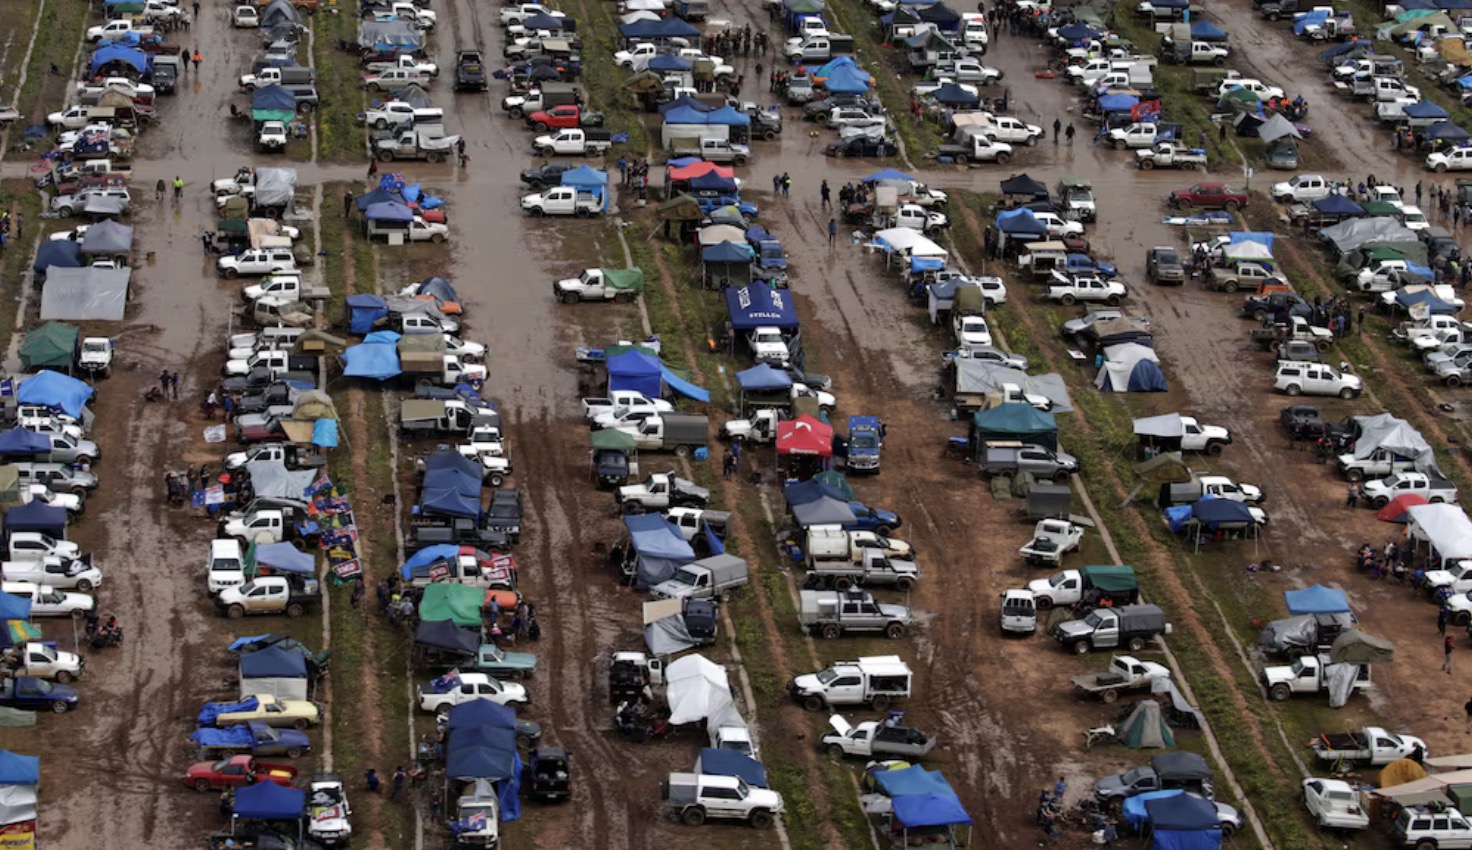 Campers trudge through mud among hundreds of ute vehicles in a paddock in this aerial picture at the Deni Ute Muster in Deniliquin, New South Wales, Australia, October 1, 2016. /Reuters